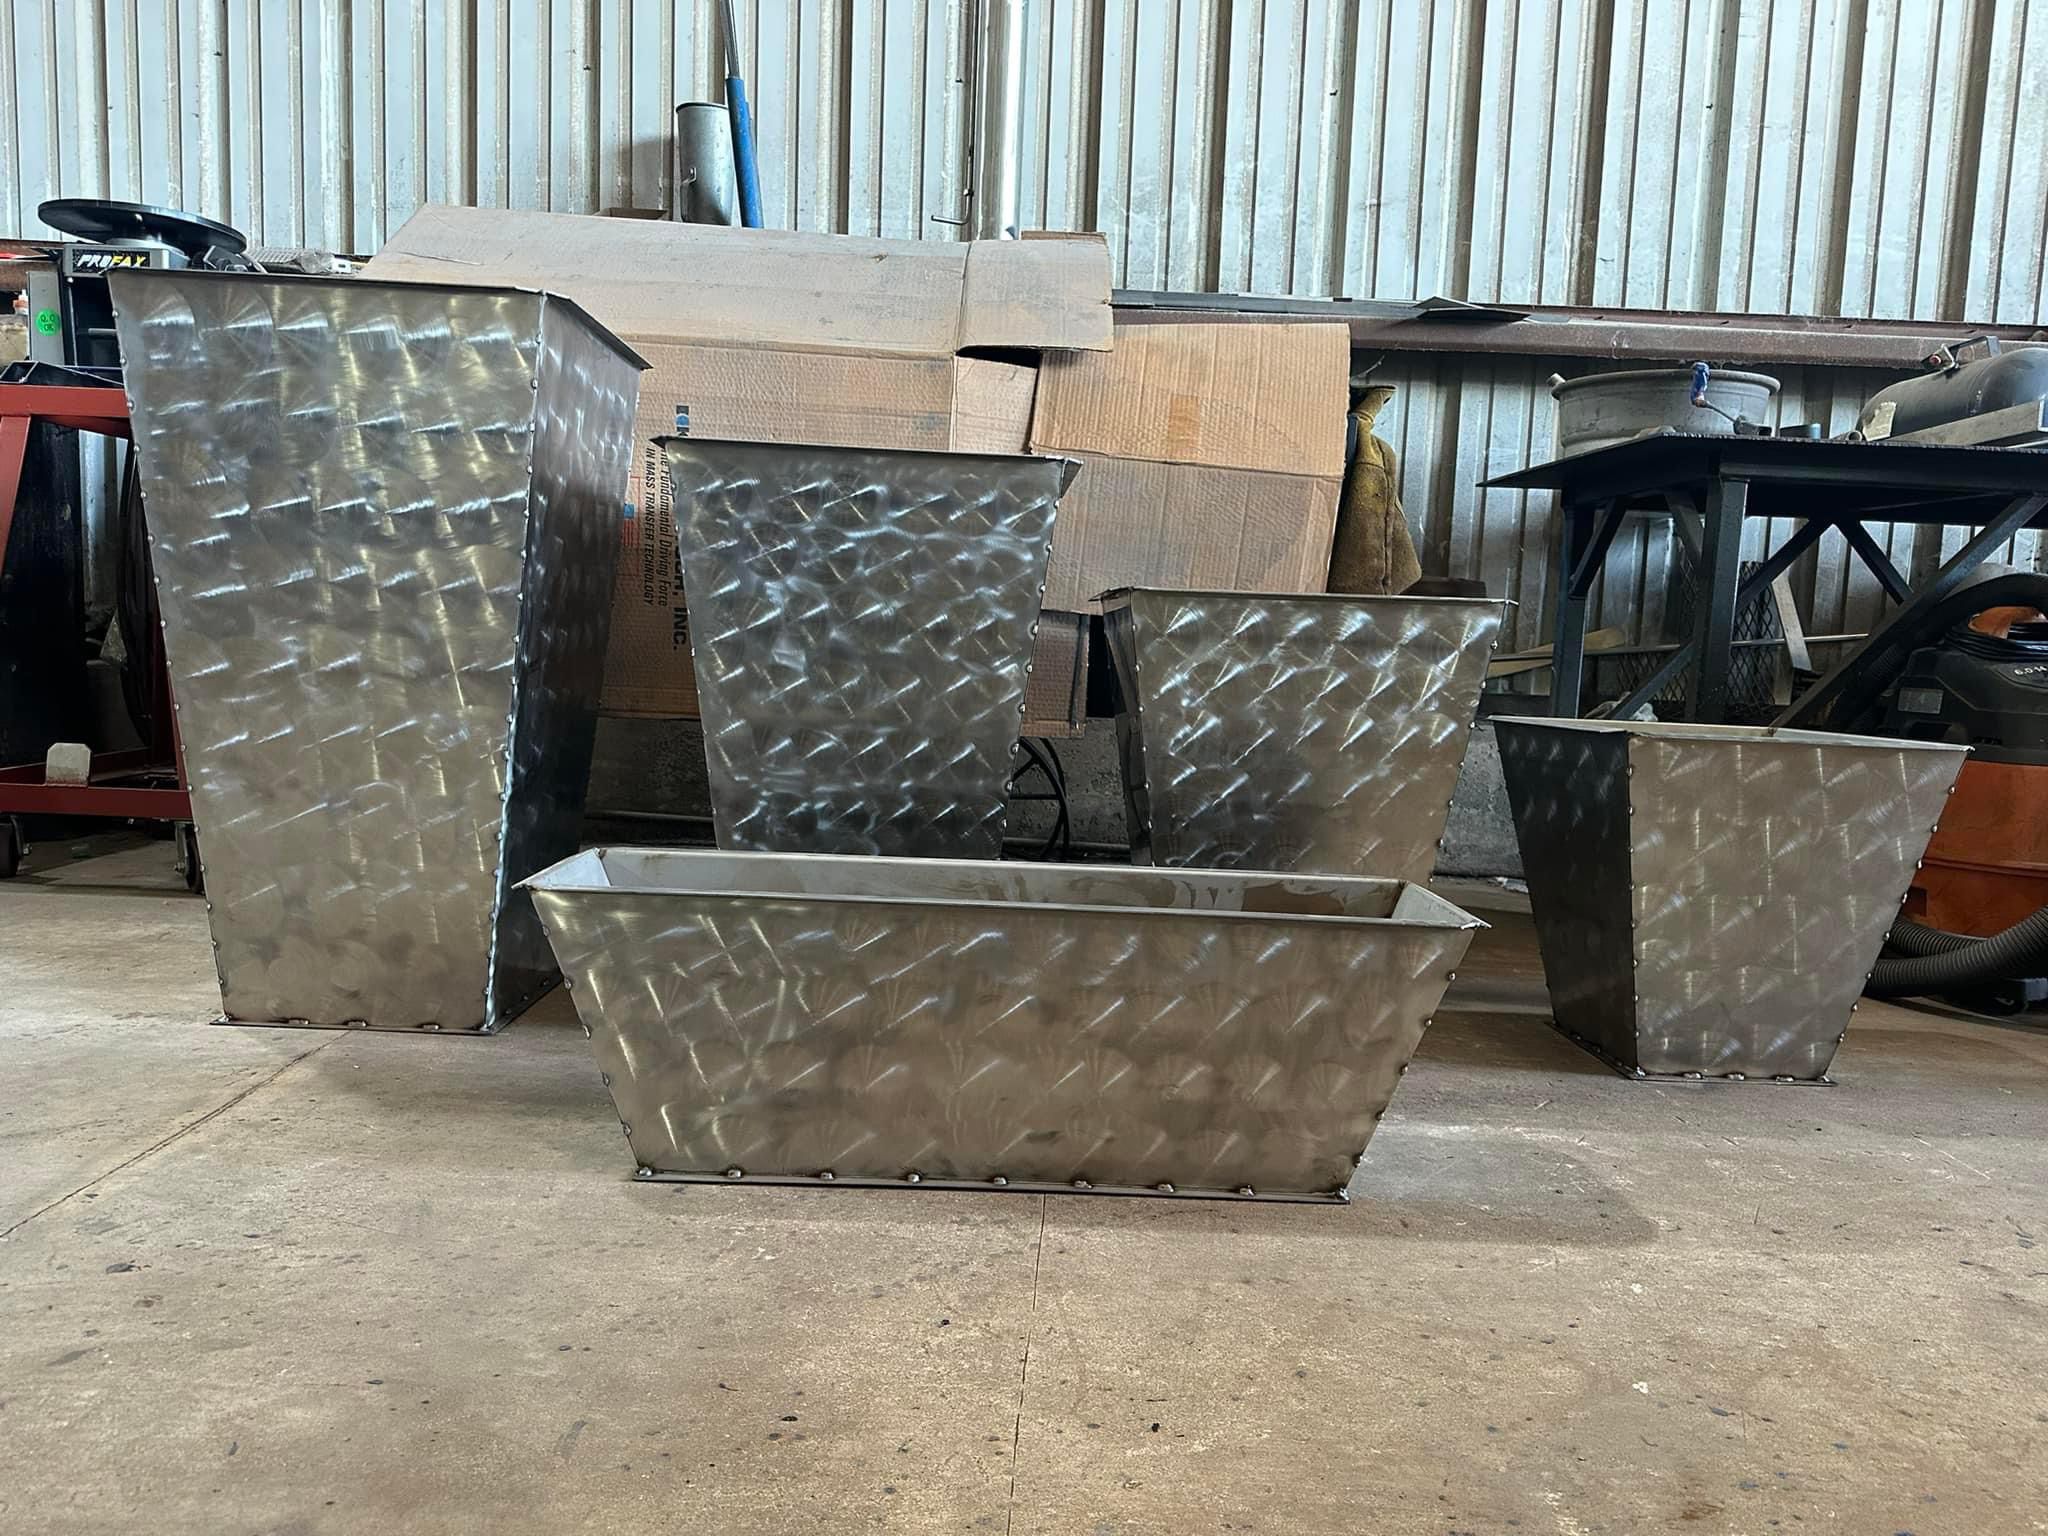 Large stainless steel planters